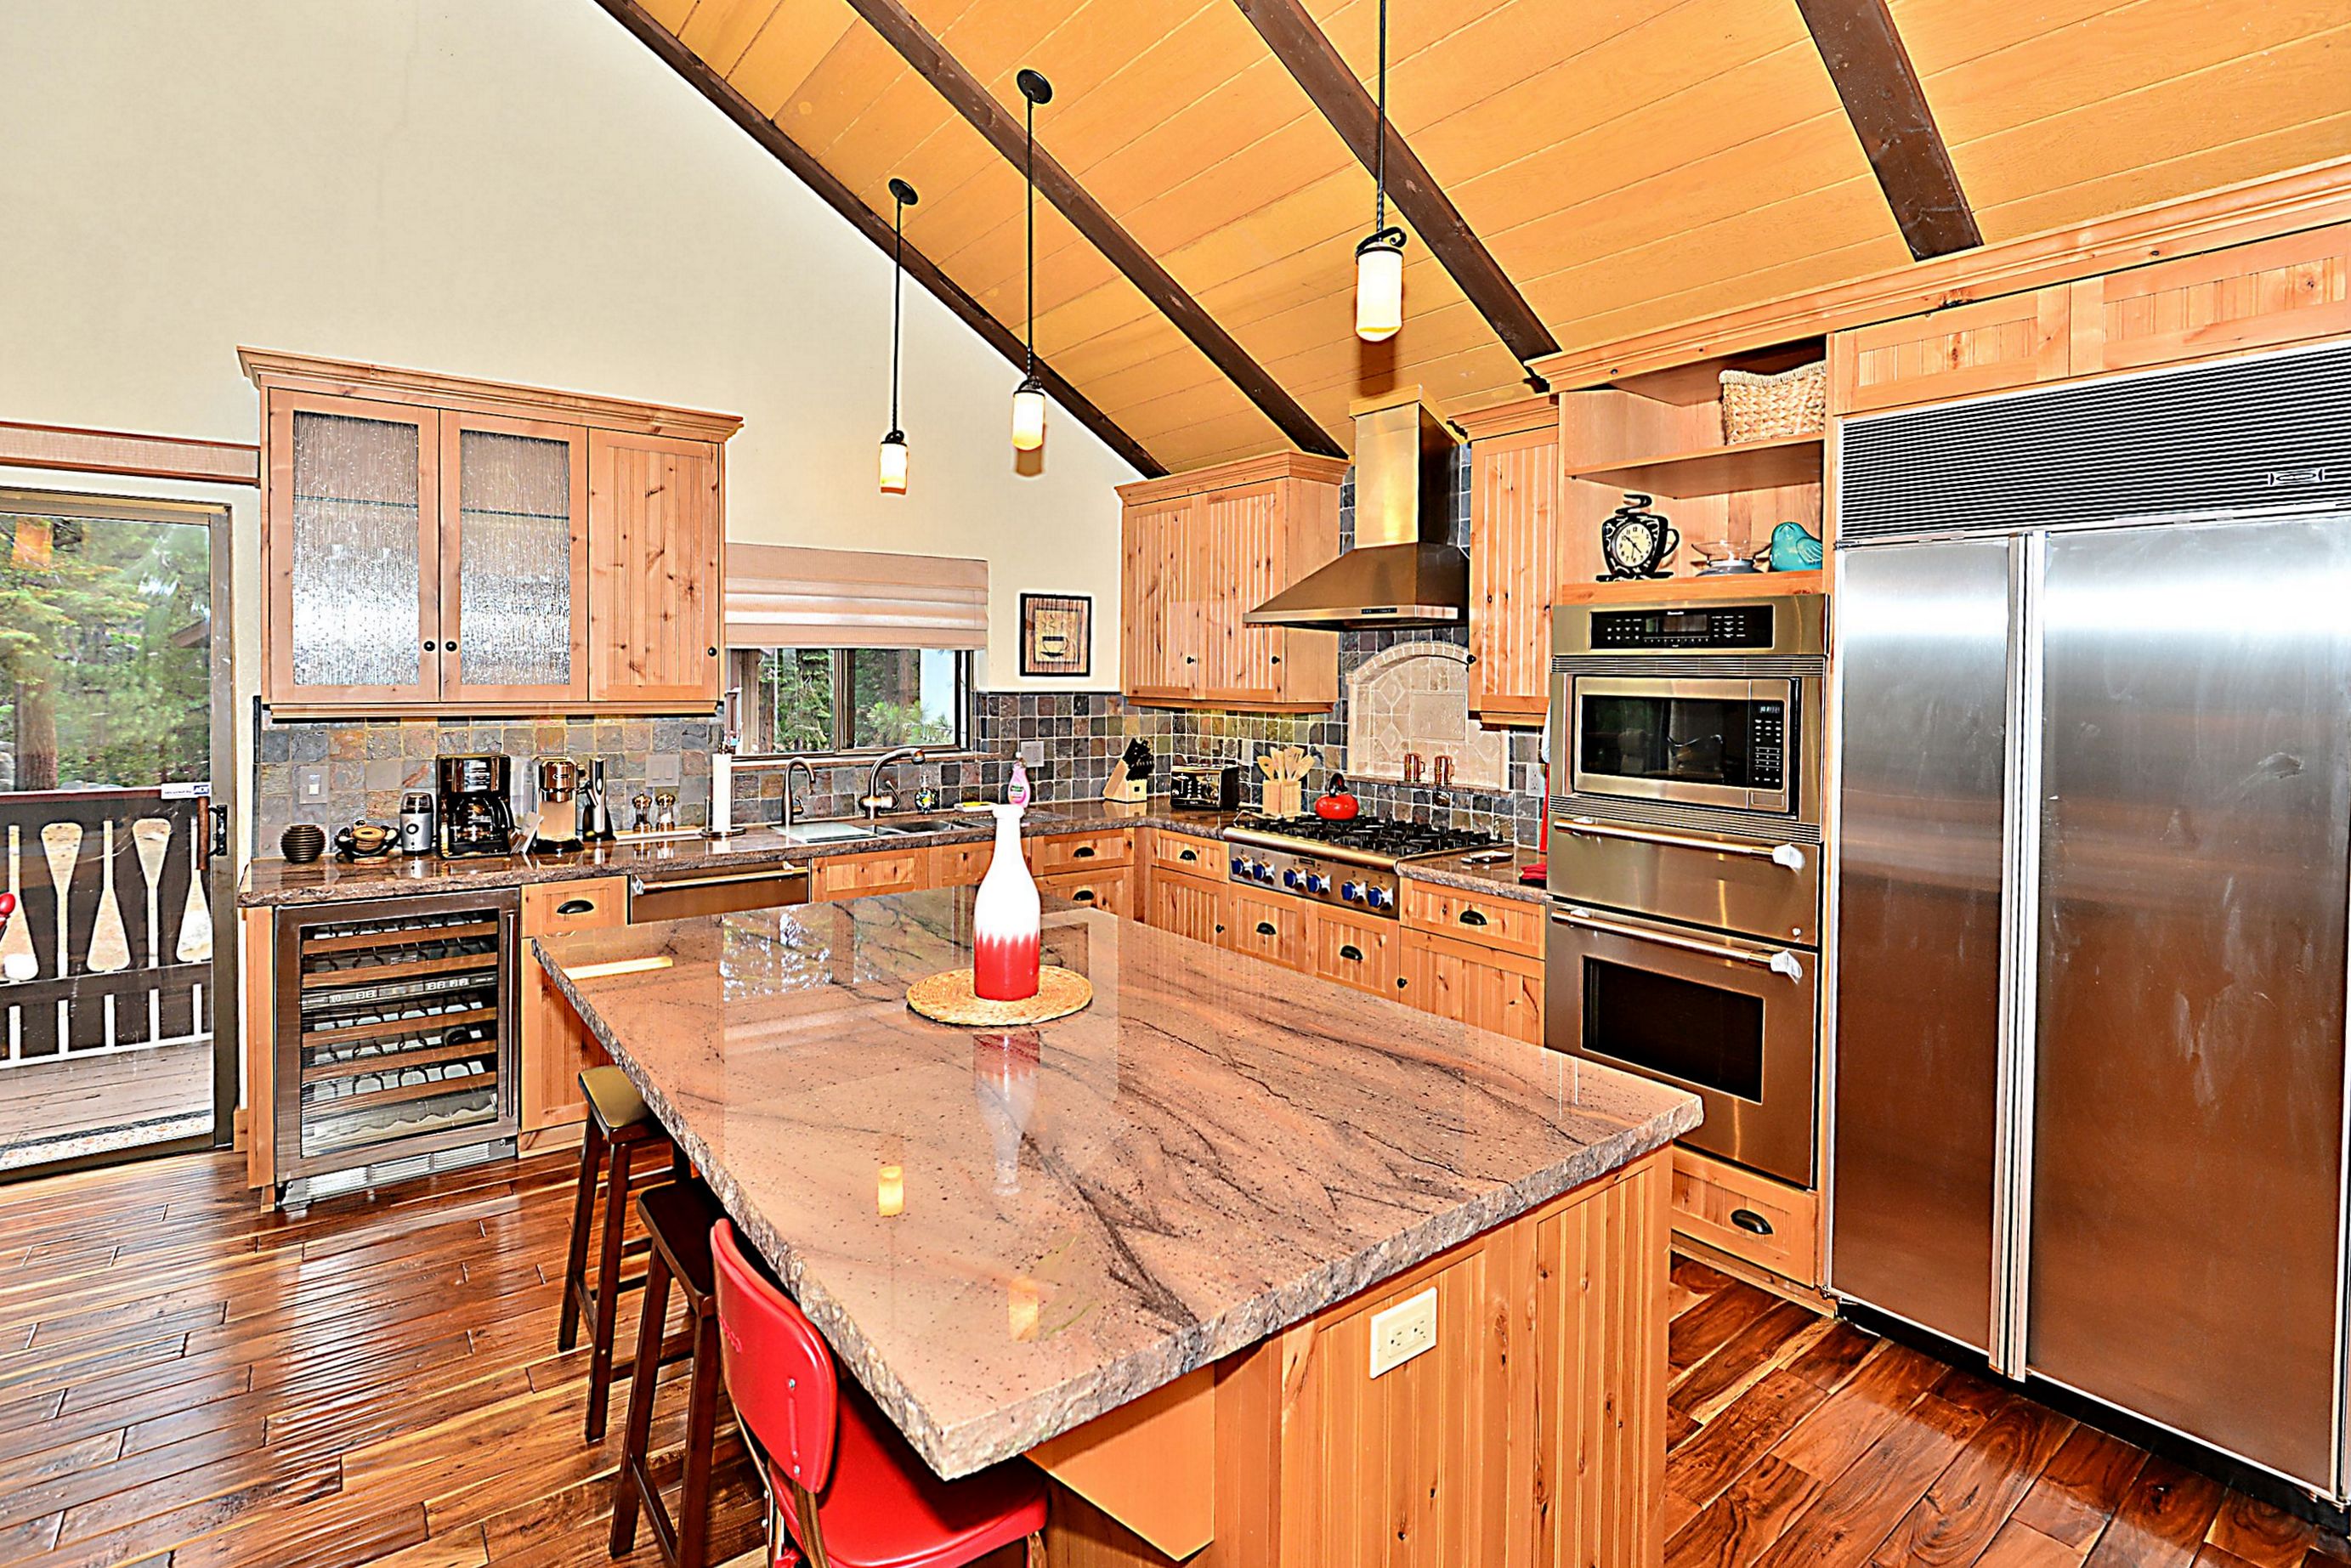 The kitchen is newly remodeled with top-of-the-line chef's appliances and a granite island.